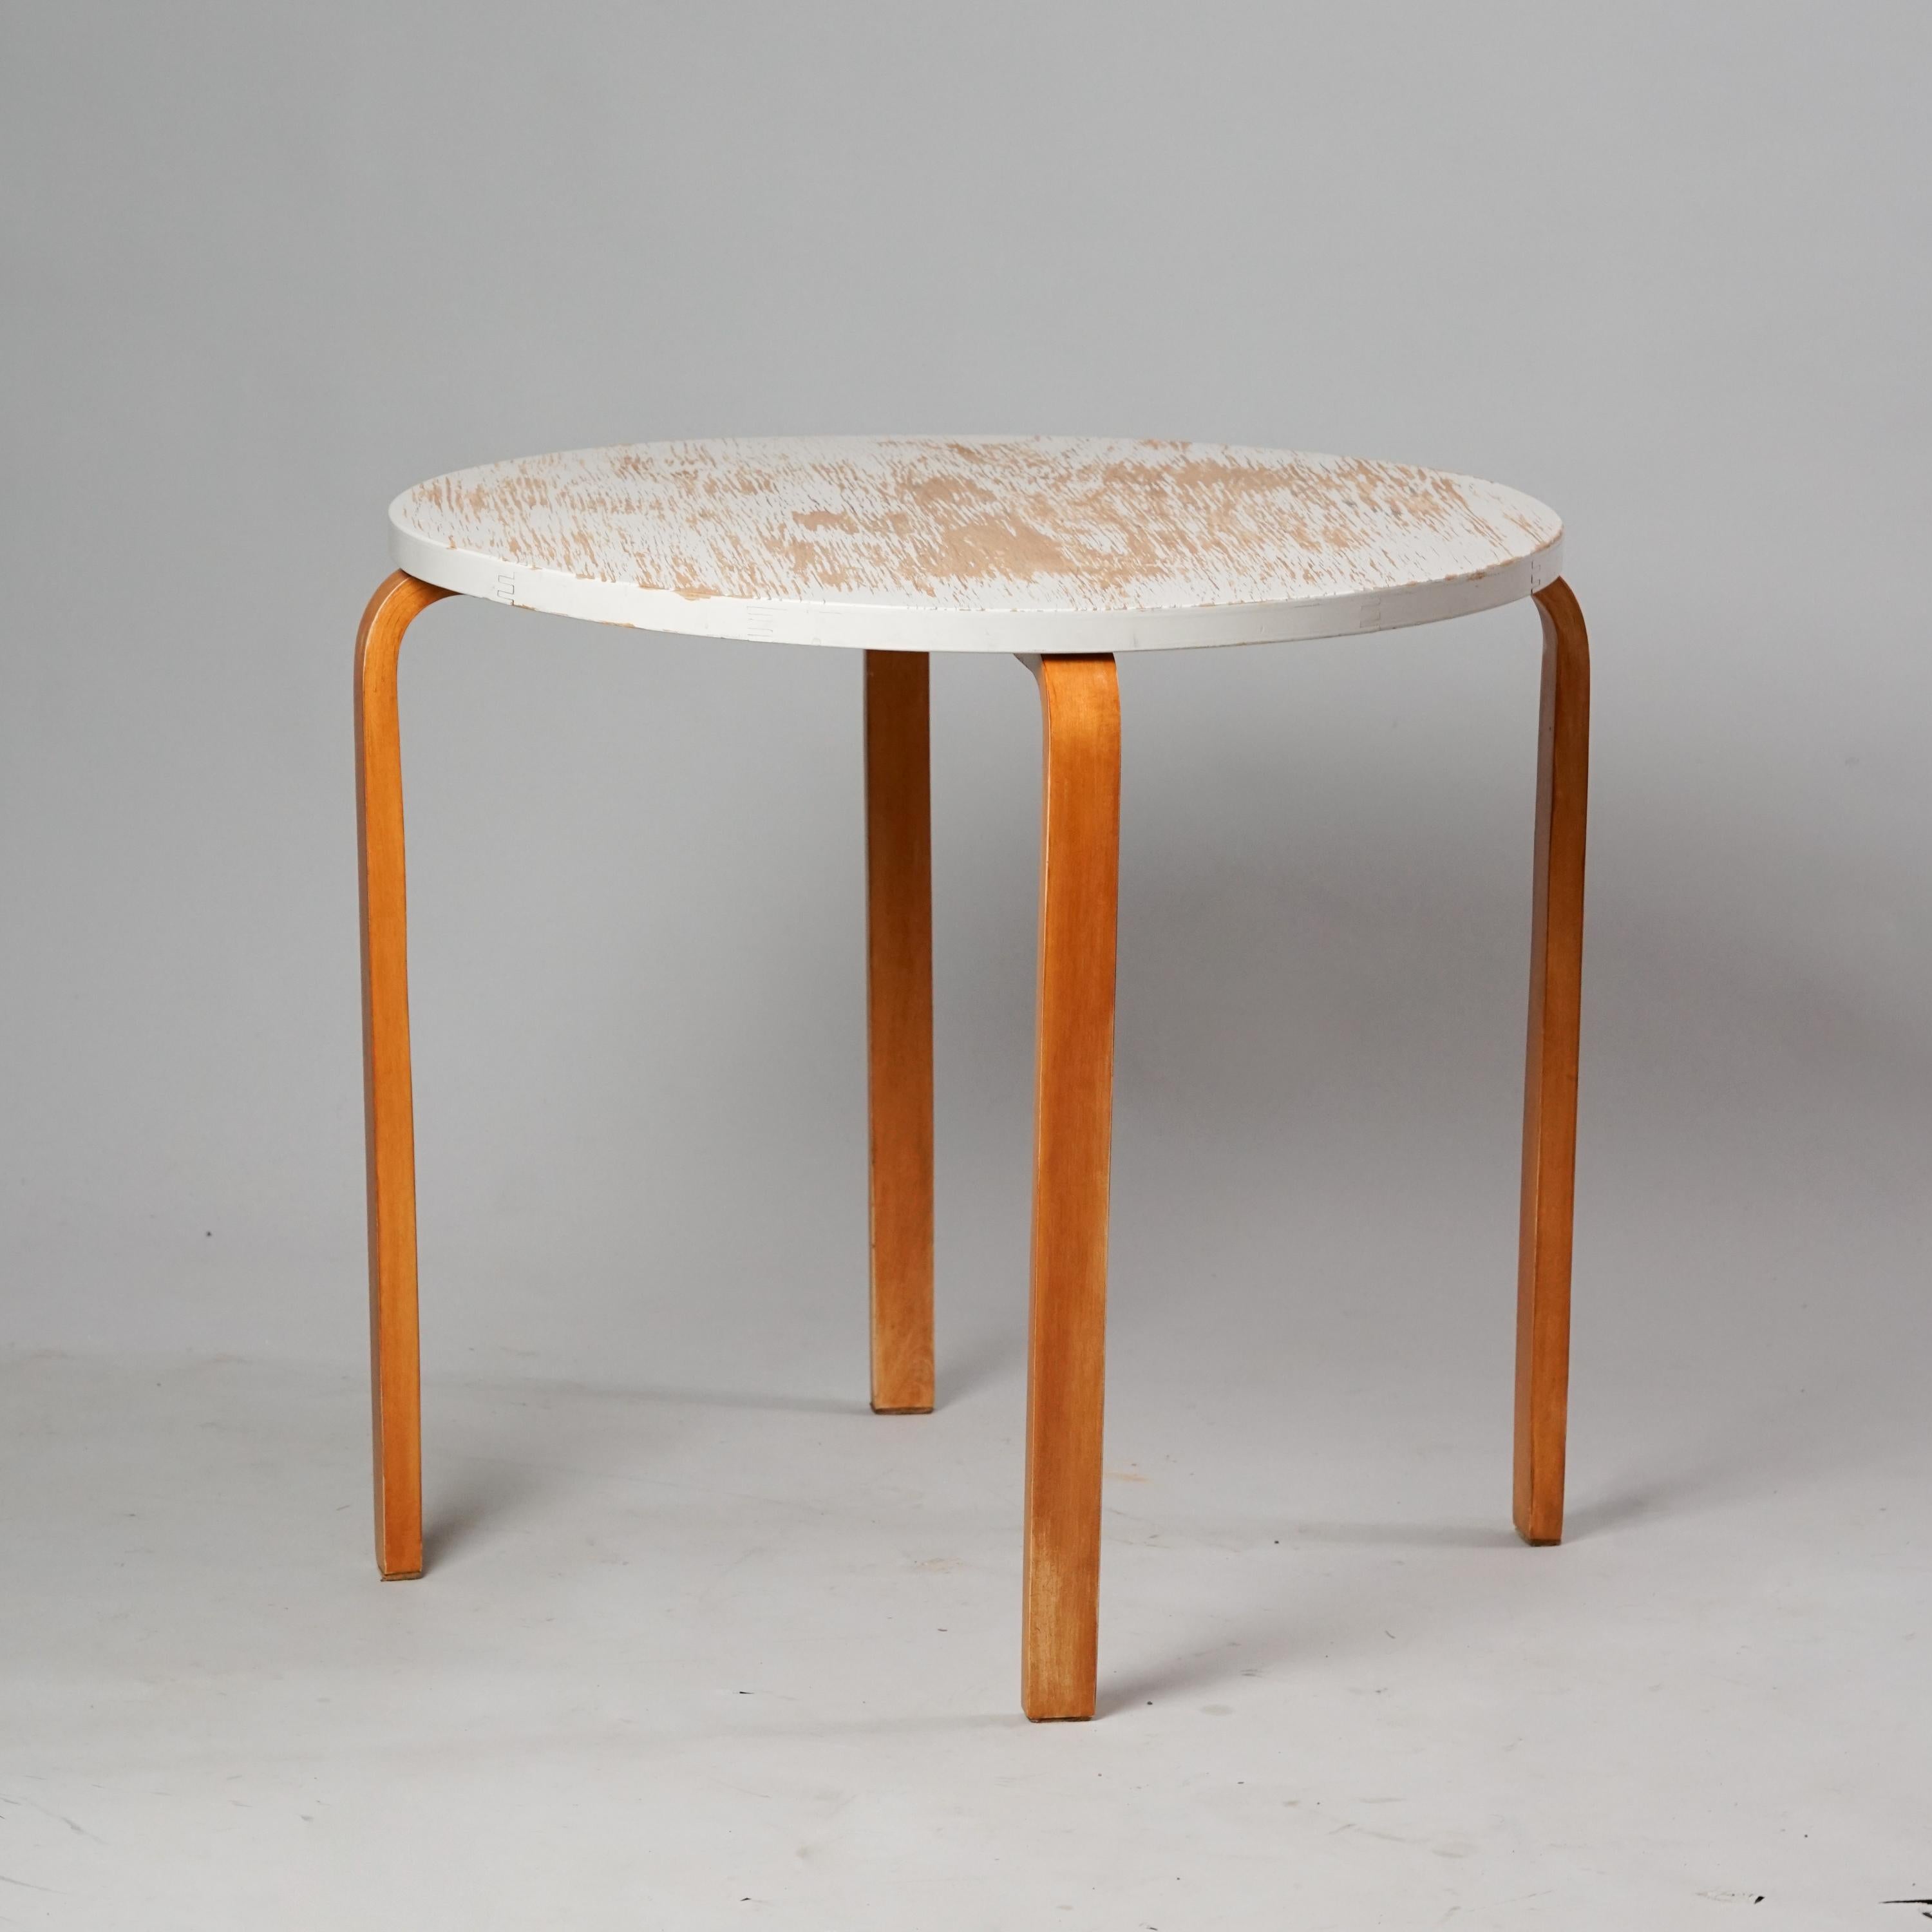 Table, designed by Alvar Aalto, manufactured by Oy Huonekalu- ja Rakennustyötehdas Ab, 1930s. Birch with original painted table top. Good vintage condition, rich patina consistent with age and use. 

Alvar Aalto (1898-1976) is probably the most